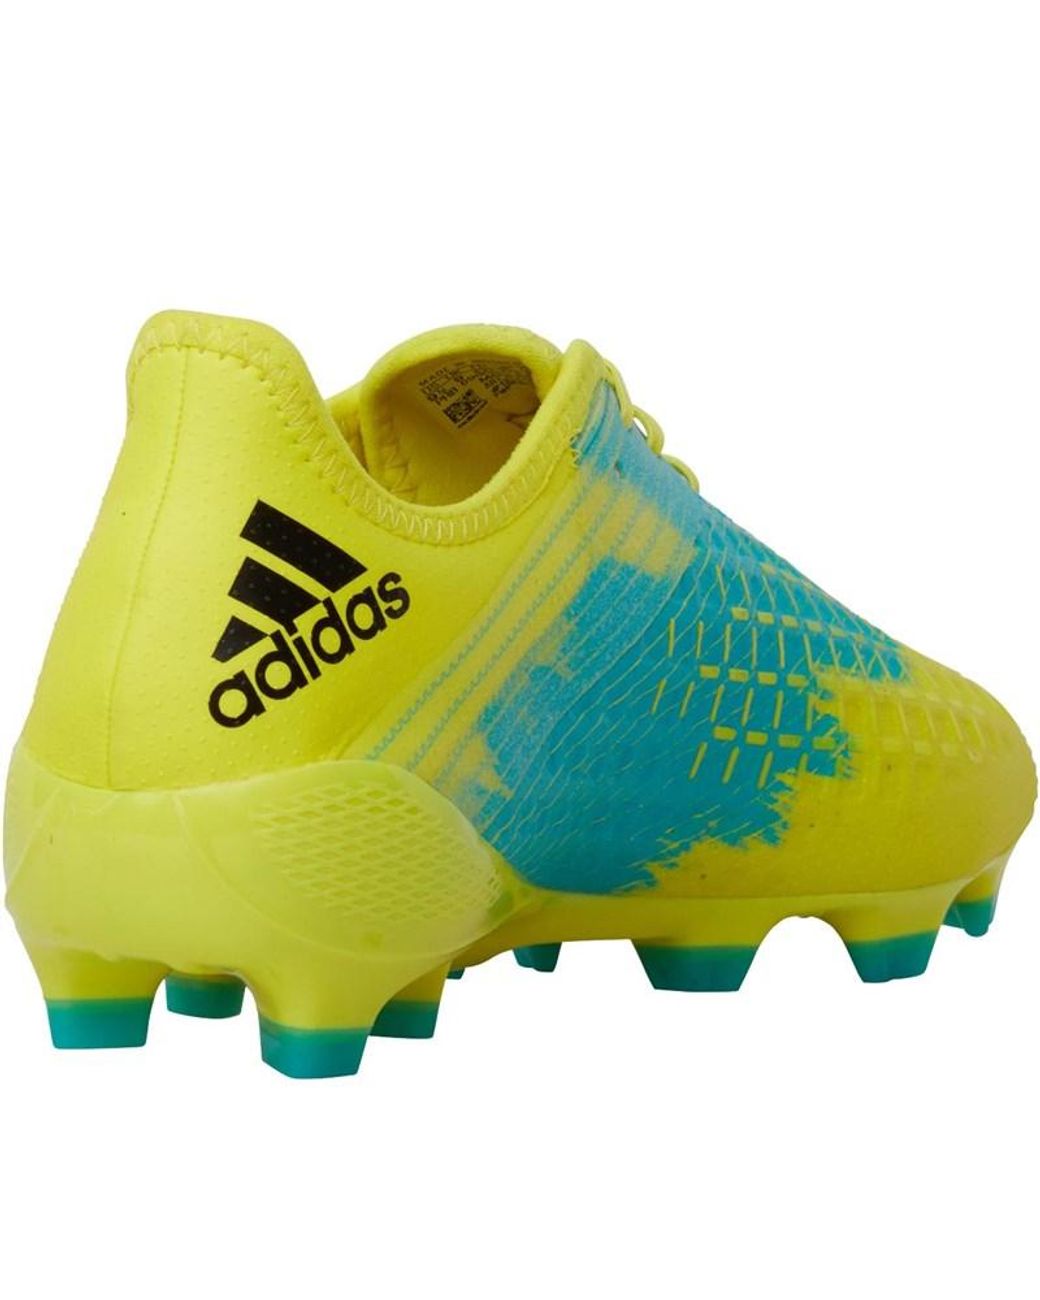 Adidas Synthetic Predator Malice Control Firm Ground Rugby Boots